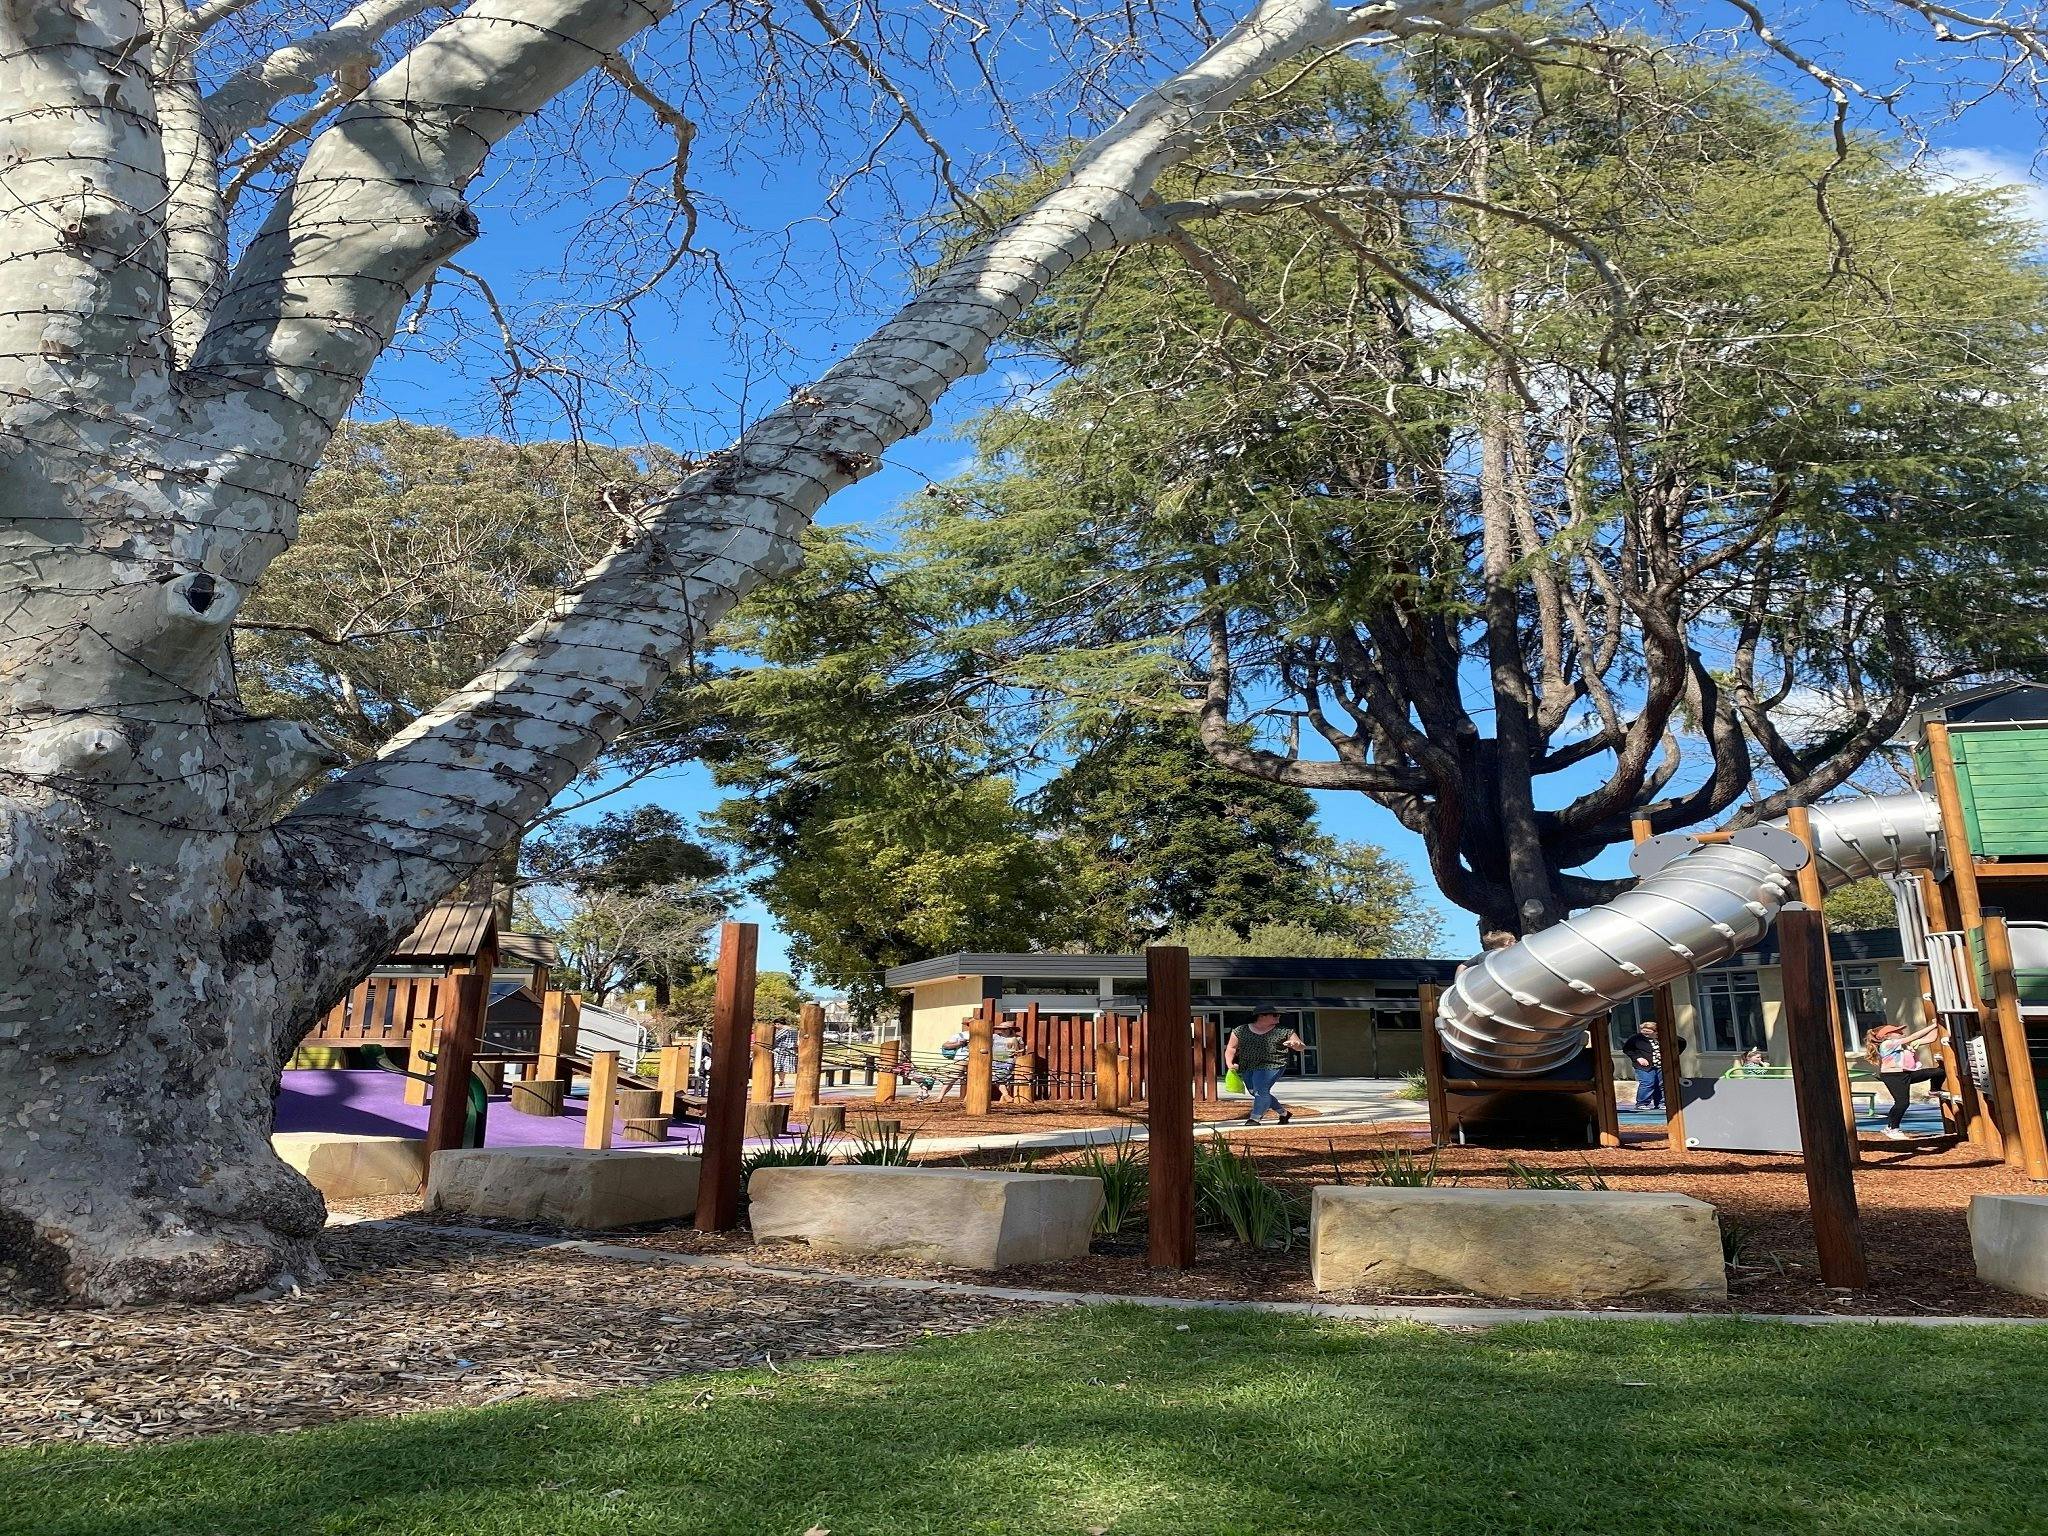 Cameron Park NSW Holidays & Things to Do, Attractions